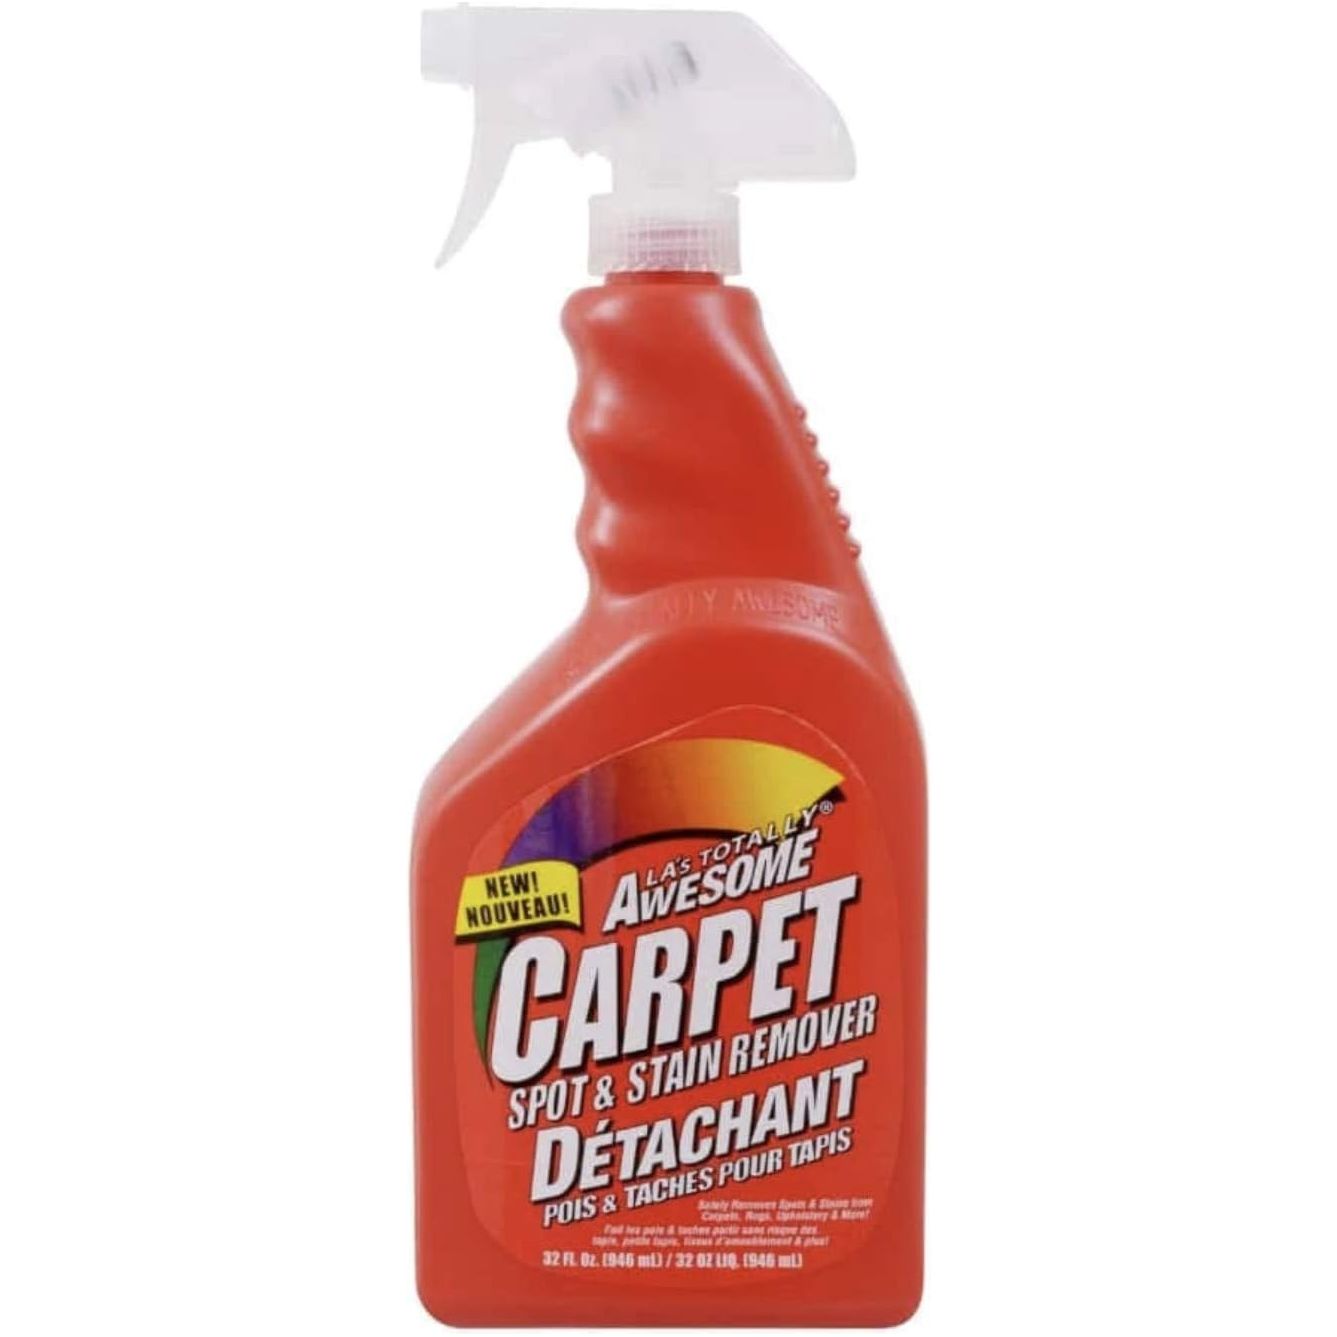 Awesome Carpet Spot & Stain 950ml